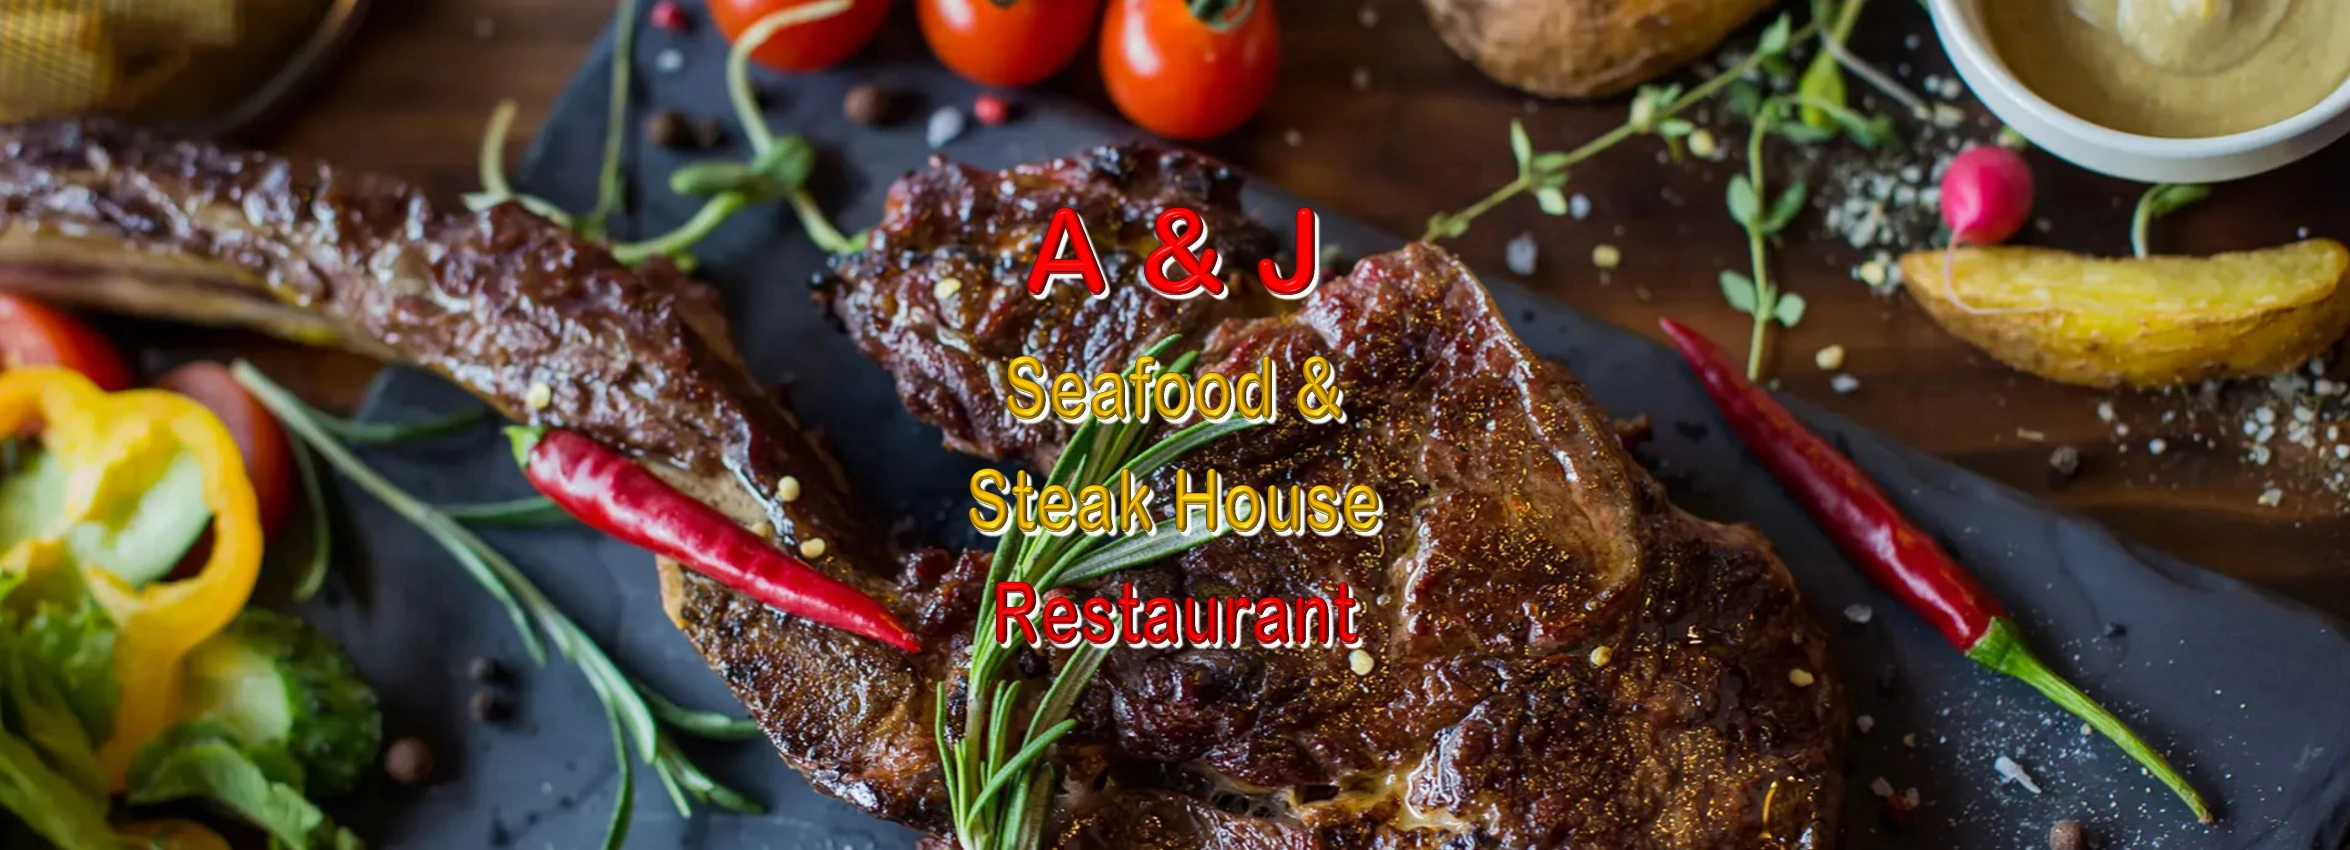 A-and-J-Seafood-and-Steak-House_desktop_ET